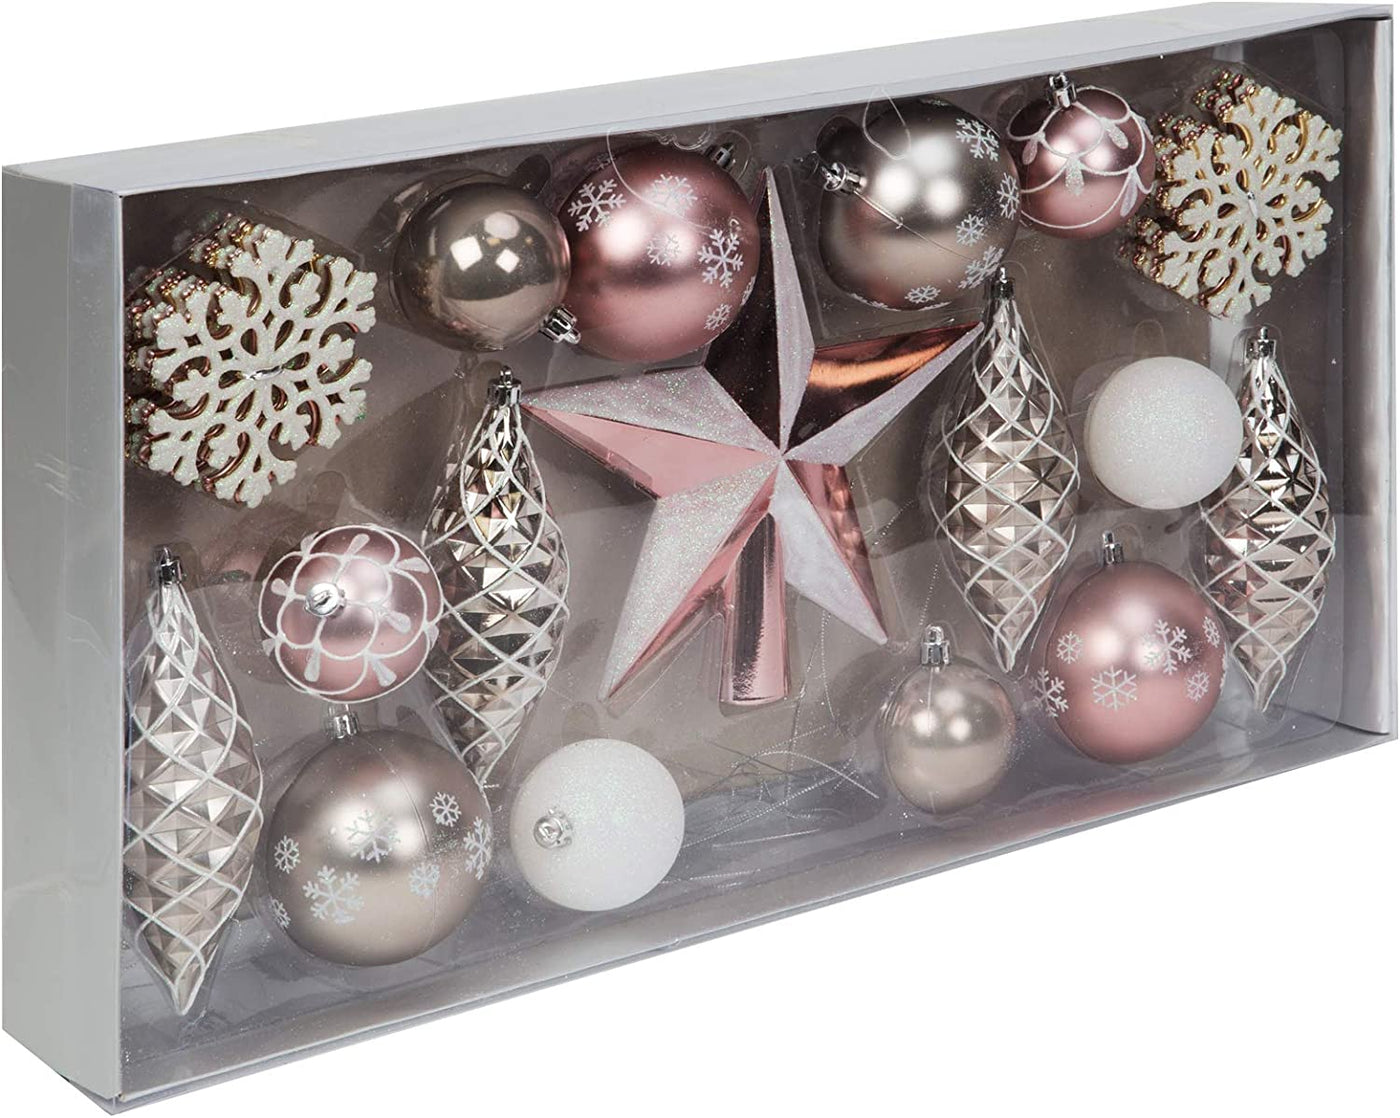 Widdop Gifts Christmas Decorations 35 Piece Silver and Pink Christmas Tree Decorations